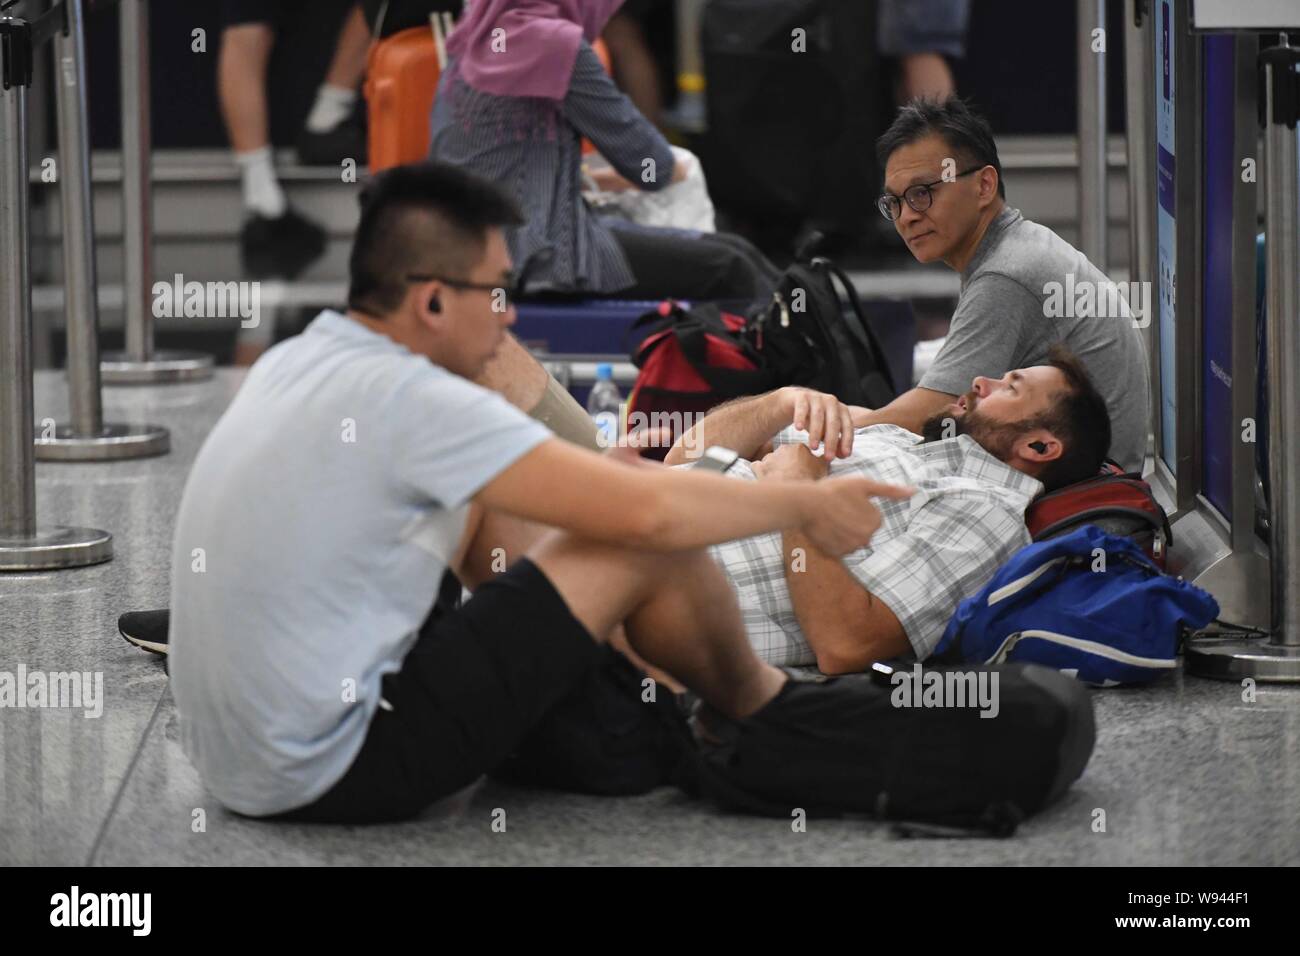 Hong Kong. 12th Aug, 2019. Stranded passengers are seen at Hong Kong International Airport in Hong Kong, south China, Aug. 12, 2019. All flights in and out of China's Hong Kong Special Administrative Region were cancelled on Monday due to a protest held in the Hong Kong International Airport, according to local airport authority. Credit: Lui Siu Wai/Xinhua/Alamy Live News Stock Photo